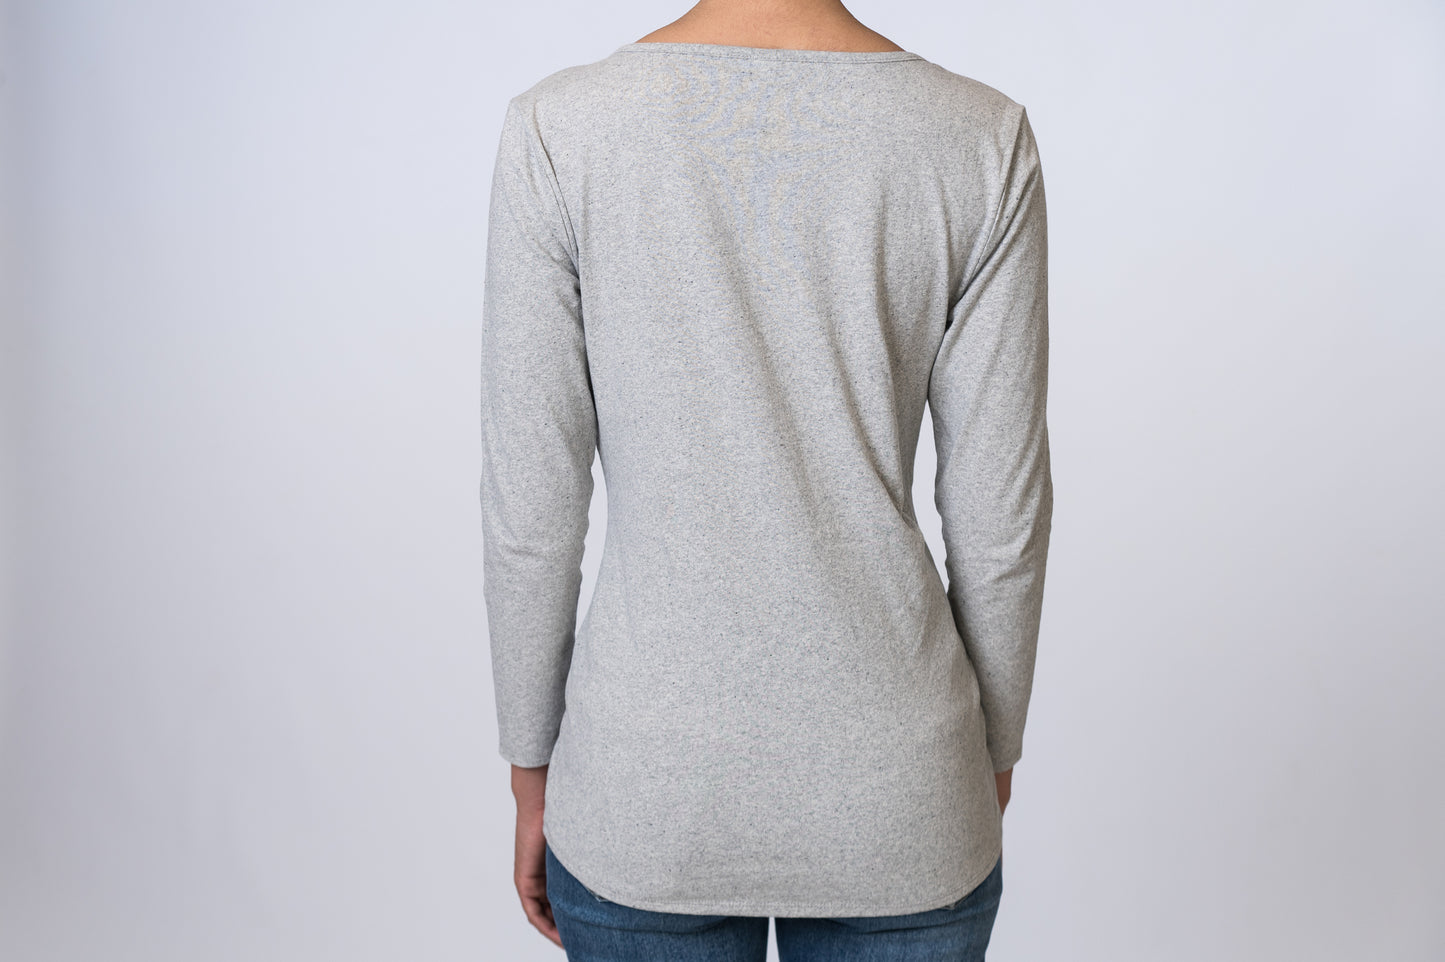 Woman wearing a light gray, asymmetric neck long sleeve top with medium wash jeans. Back of clothing is being shown